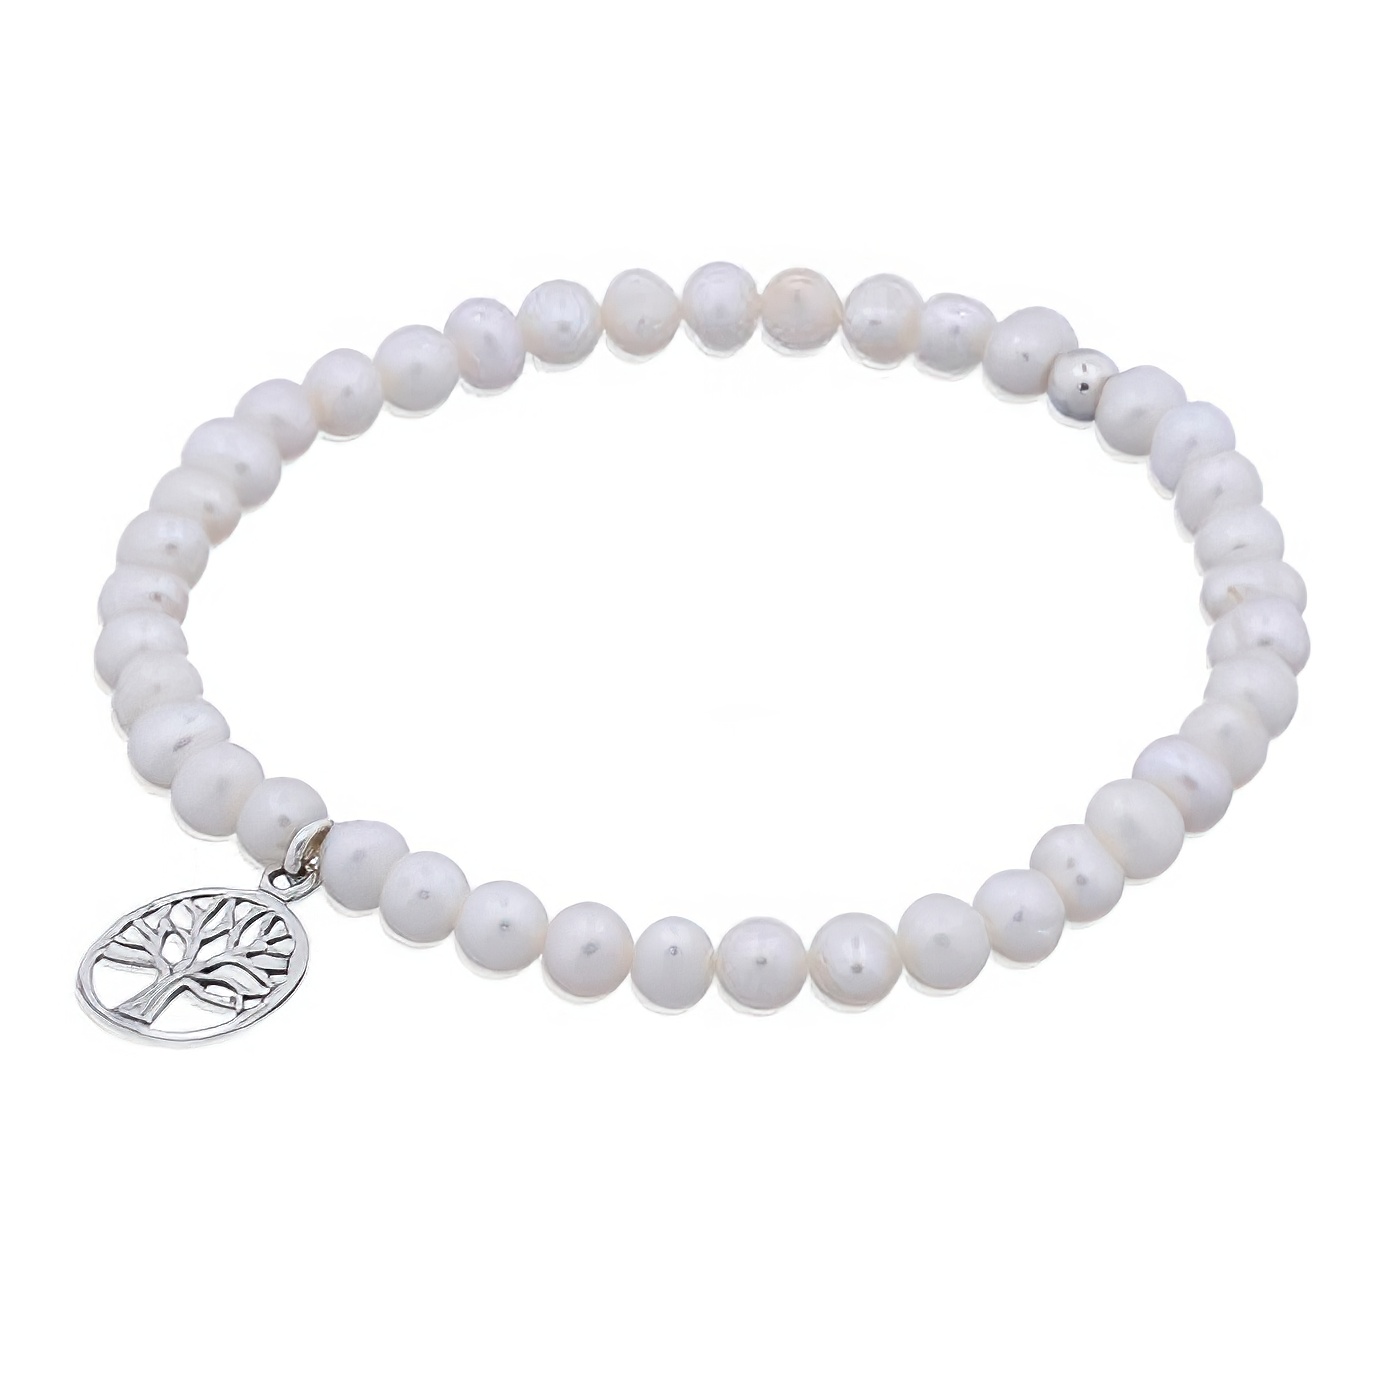 4mm Freshwater Pearl Stretch Bracelet with Tree of Life Charm 